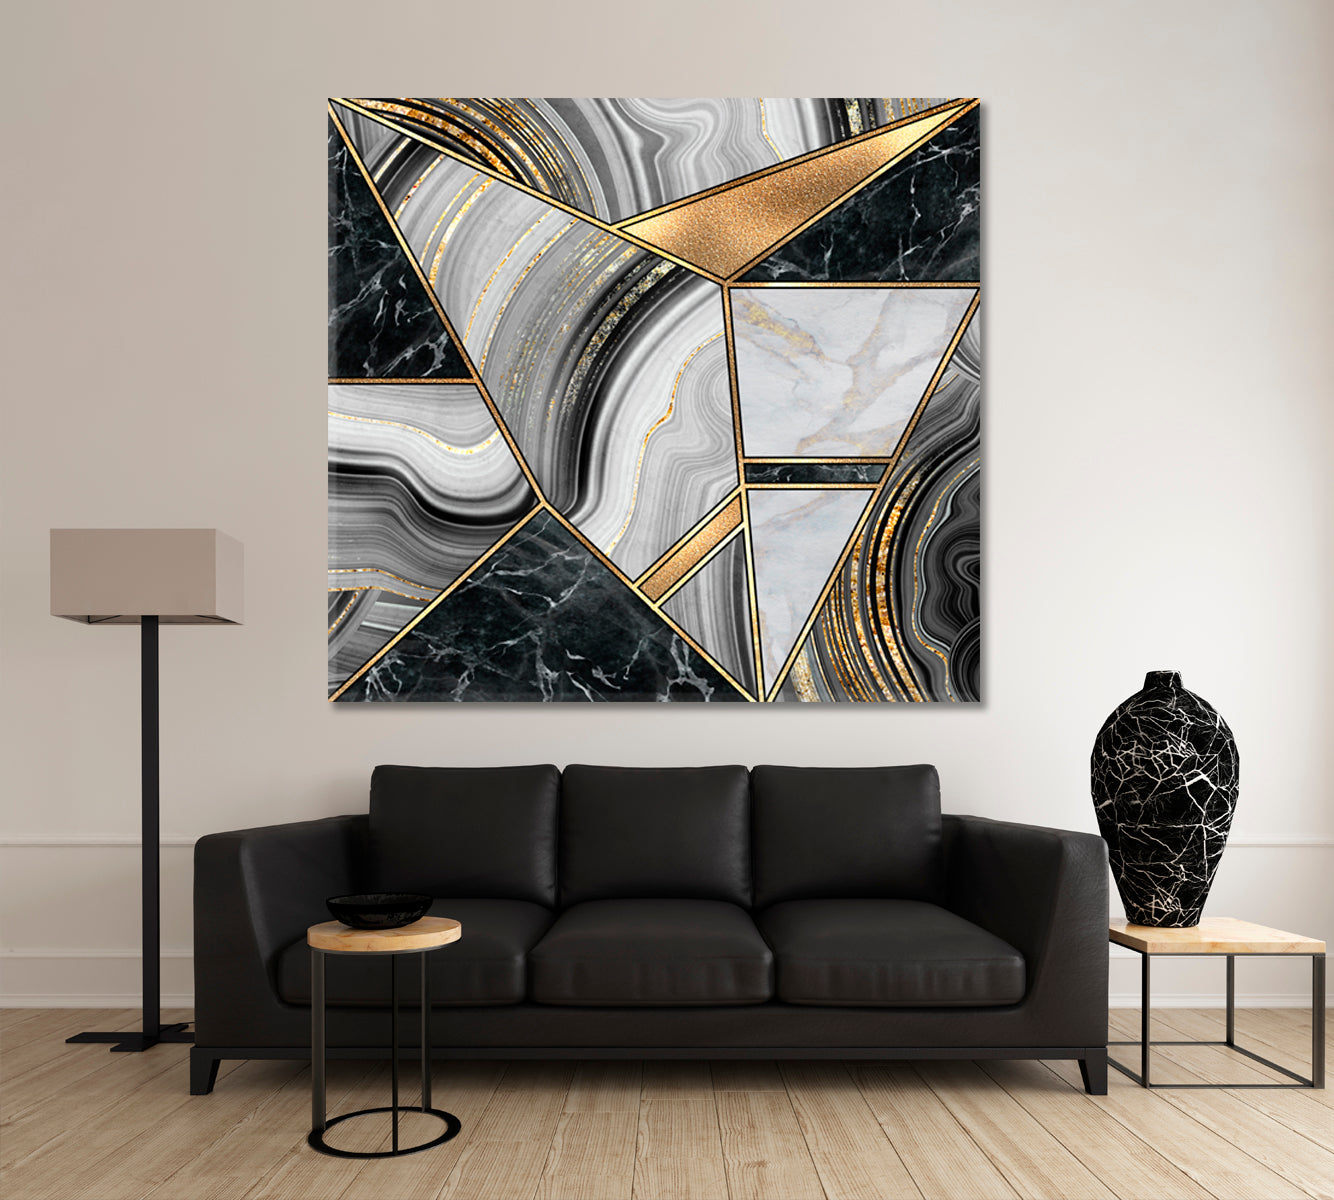 Abstract Minimalist Art Deco Geometric Forms Marble | Square Abstract Art Print Artesty 1 Panel 12"x12" 